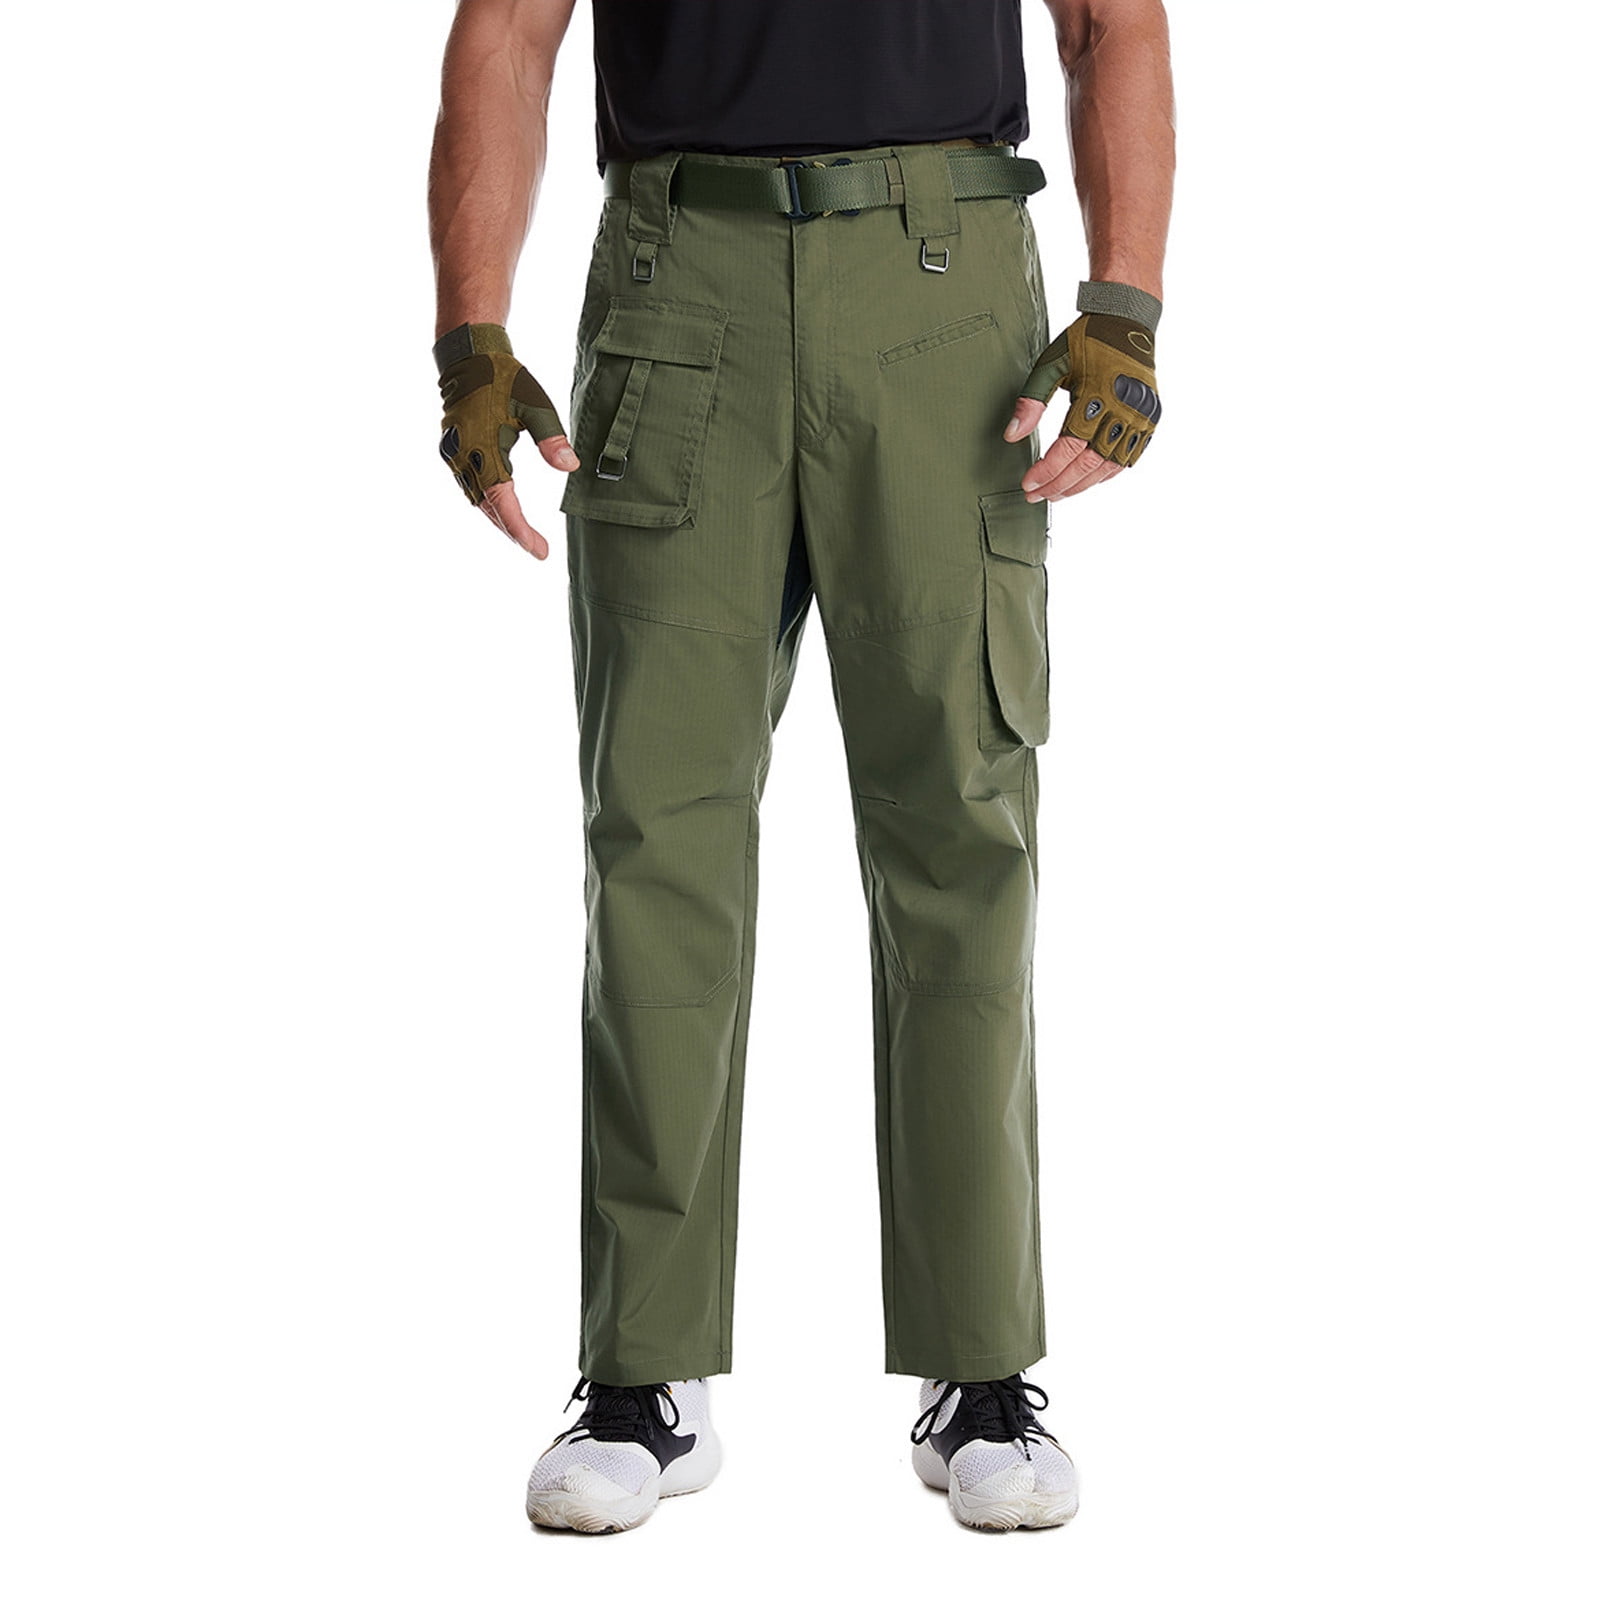 Buy ReFire Gear Mens Military Tactical Cargo Pants Ripstop Cotton Camo Outdoor  Work Trousers at Amazonin